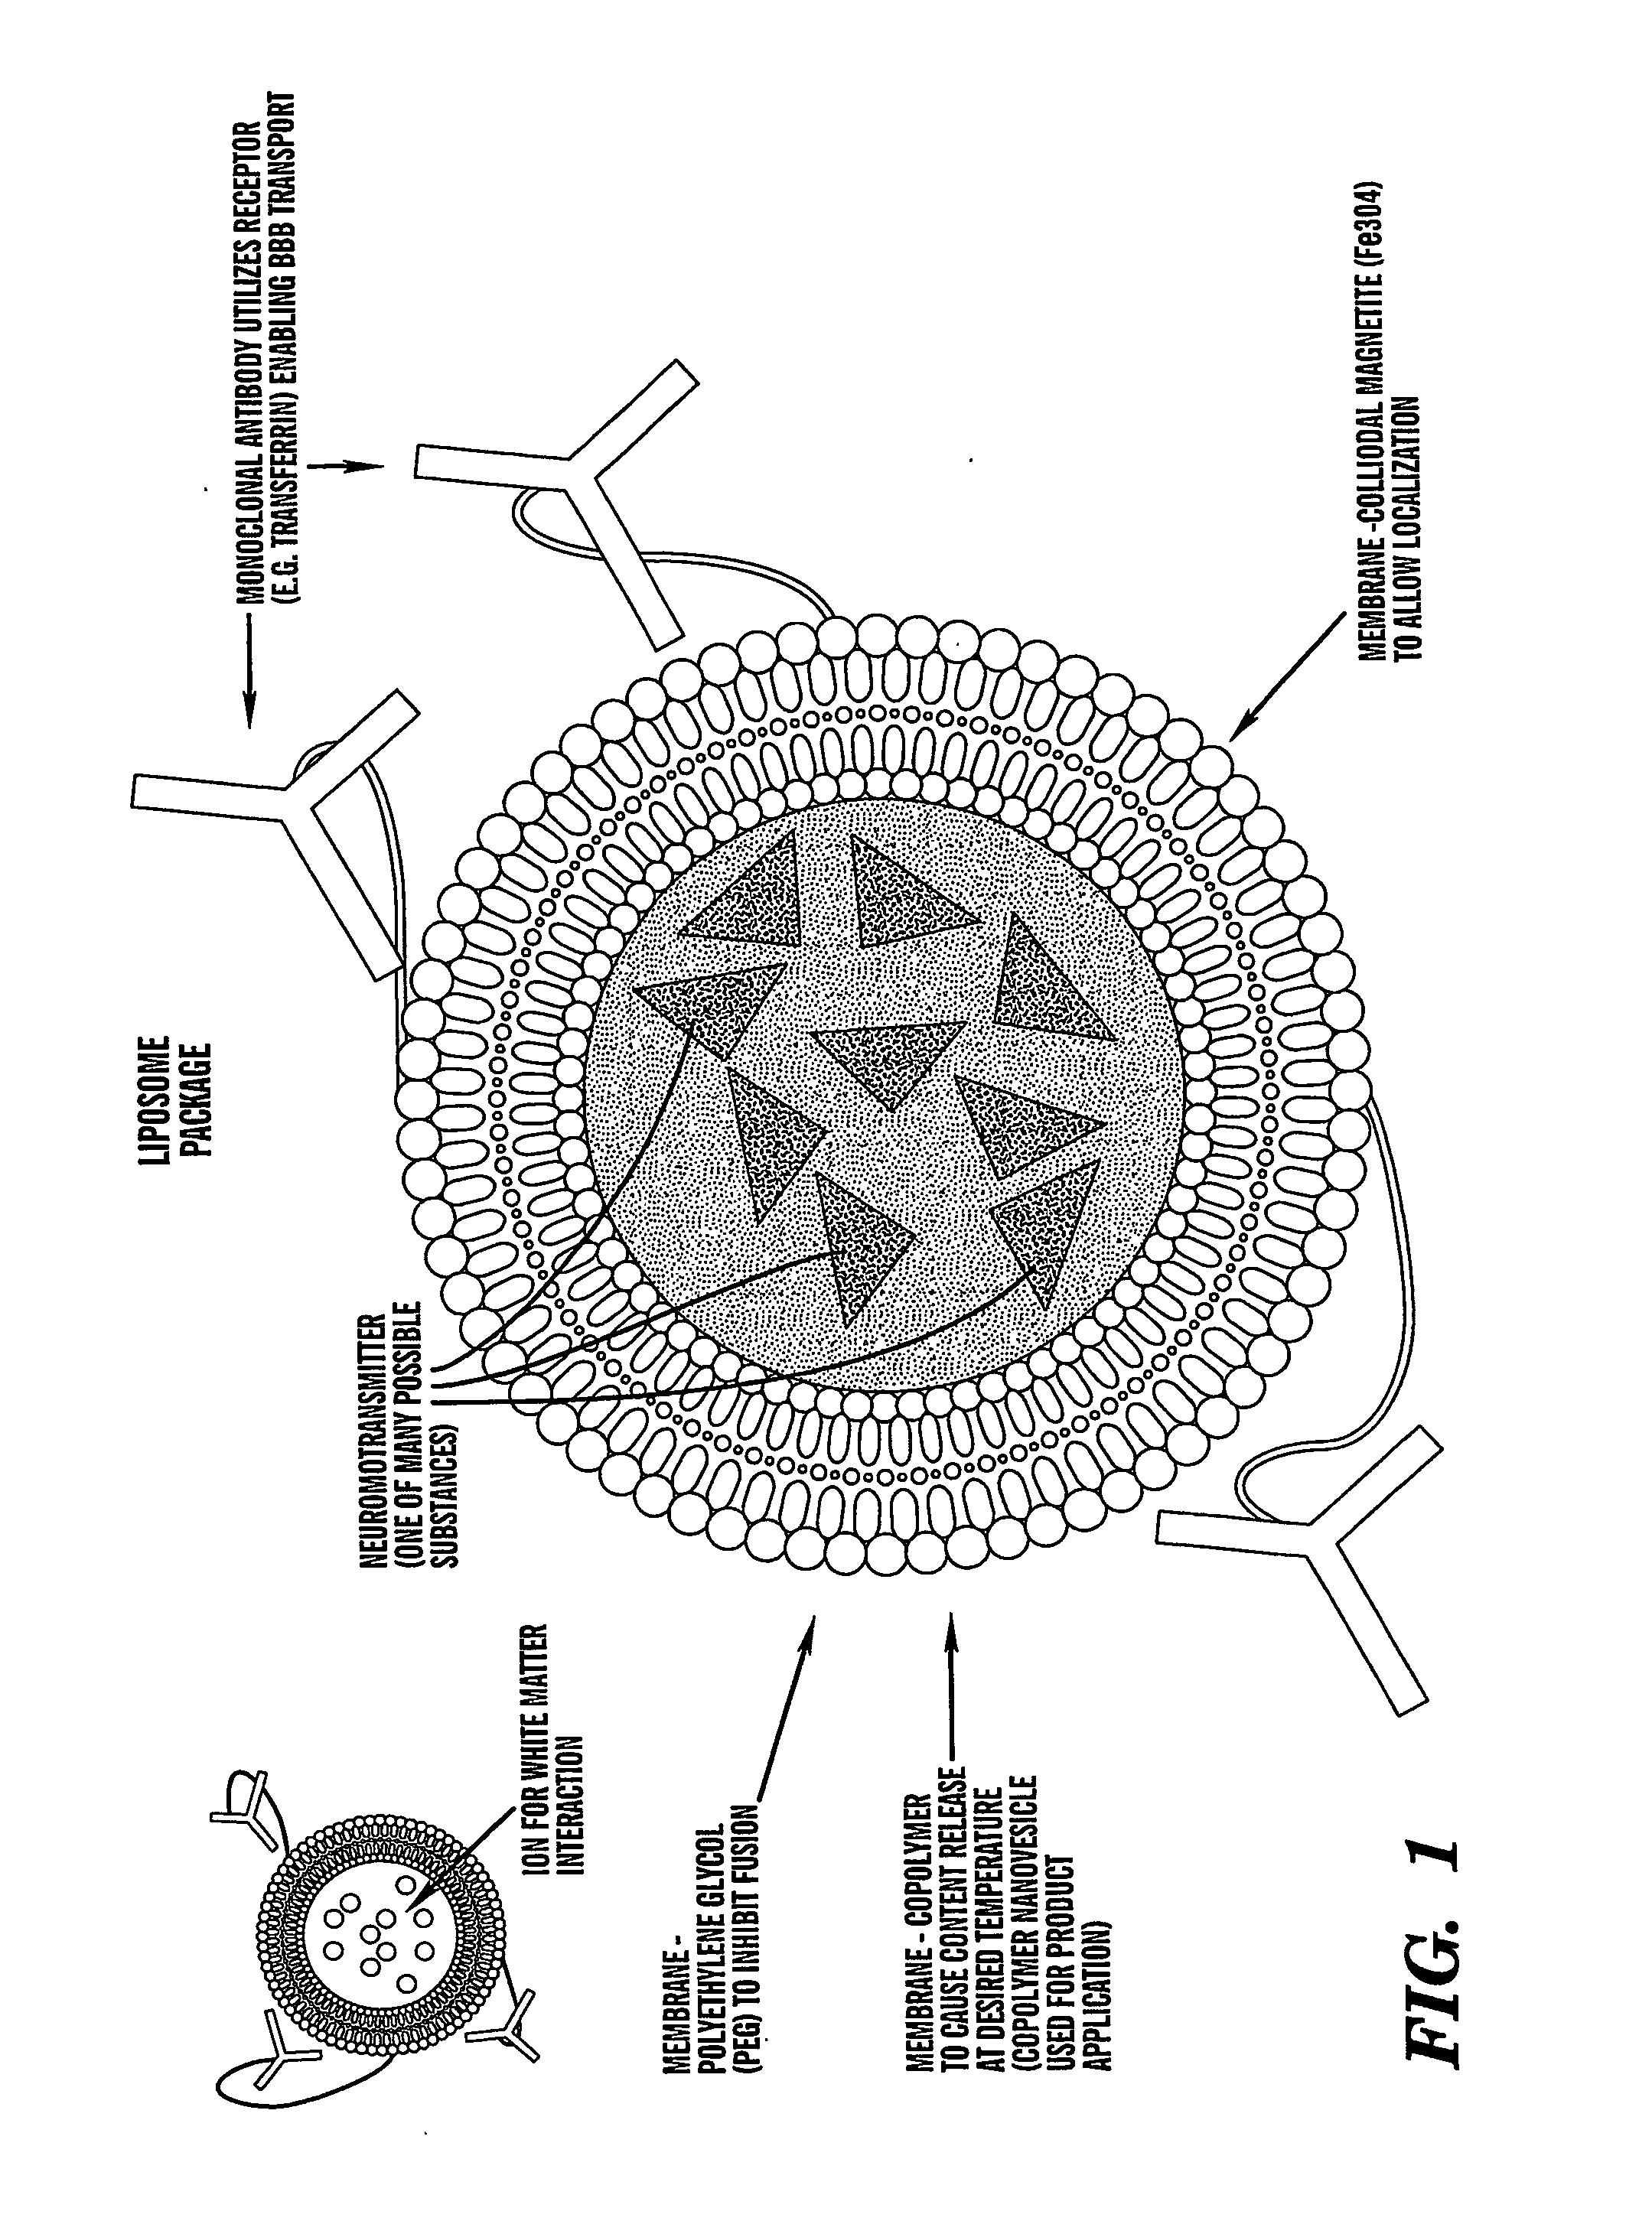 Localized non-invasive biological modulation system